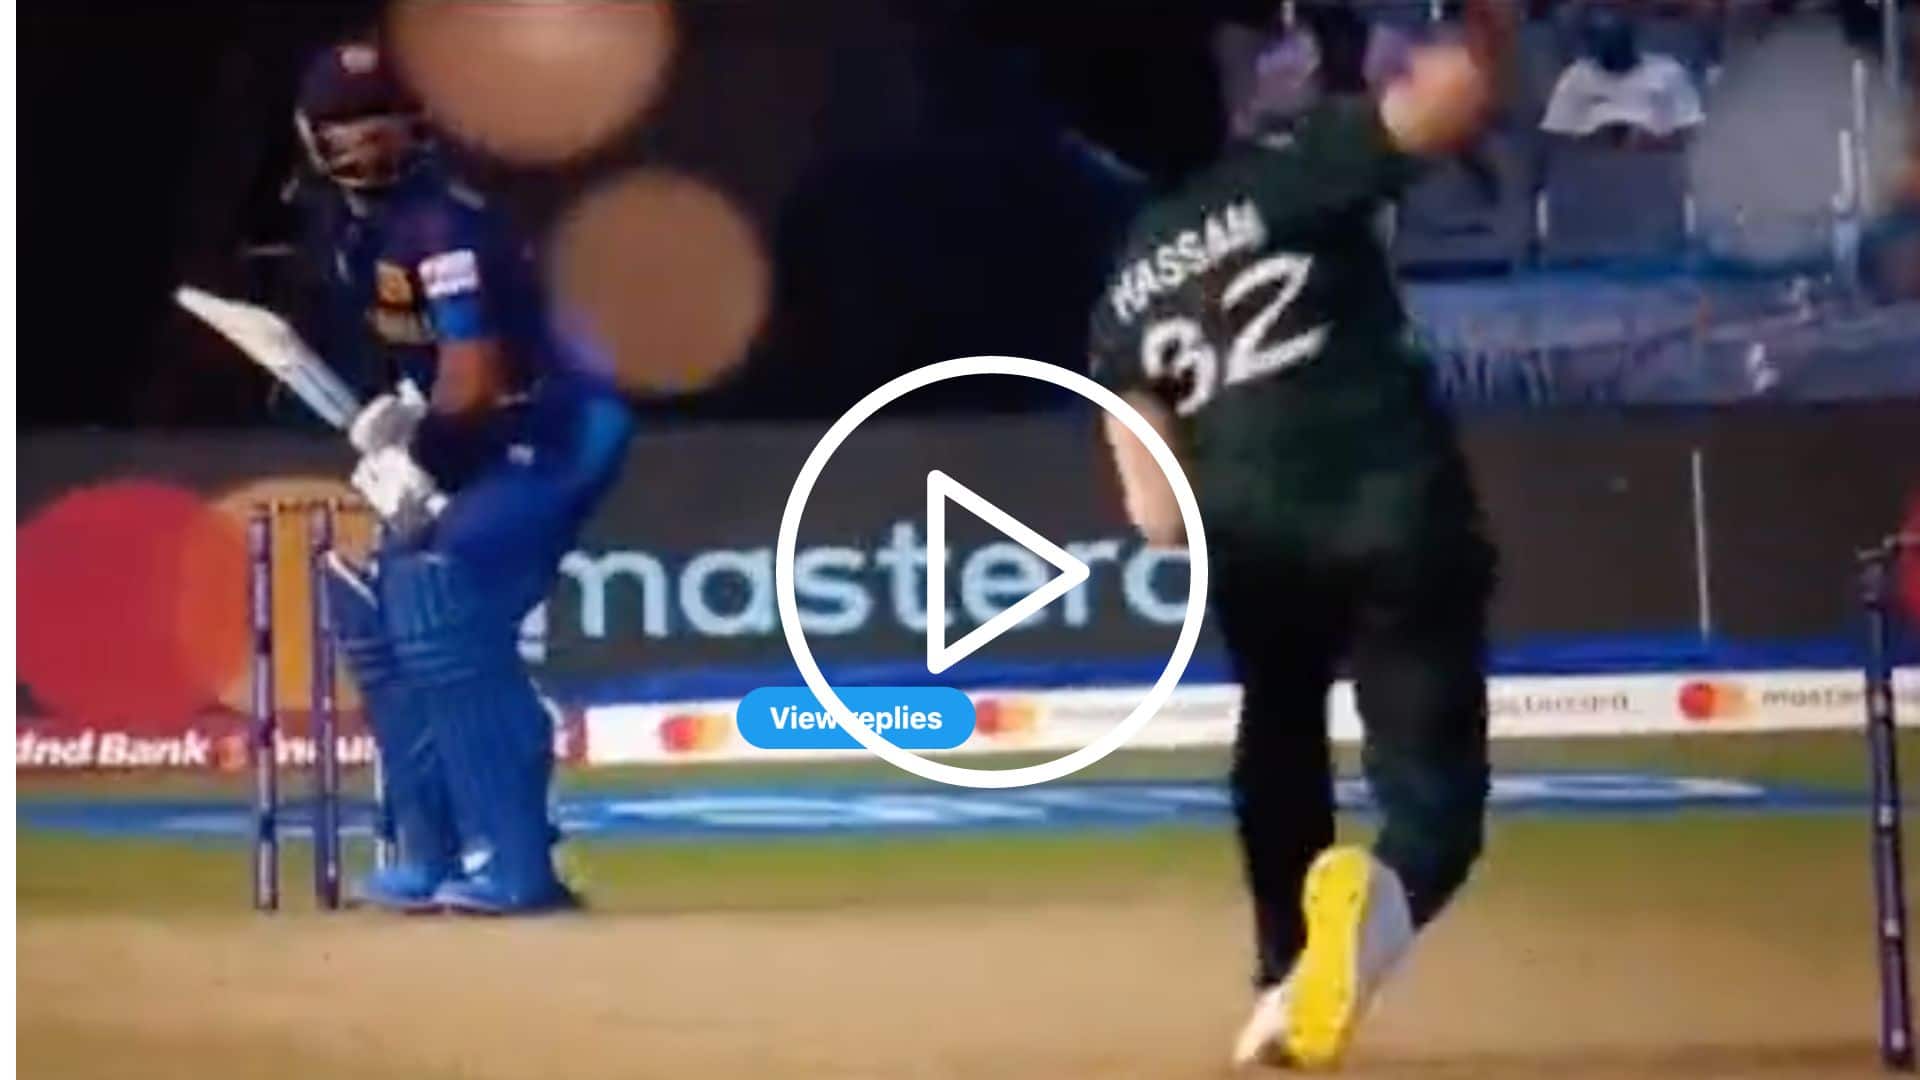 [Watch] Kusal Mendis Gets To His 65-Ball Century With Massive Six Against Hasan Ali